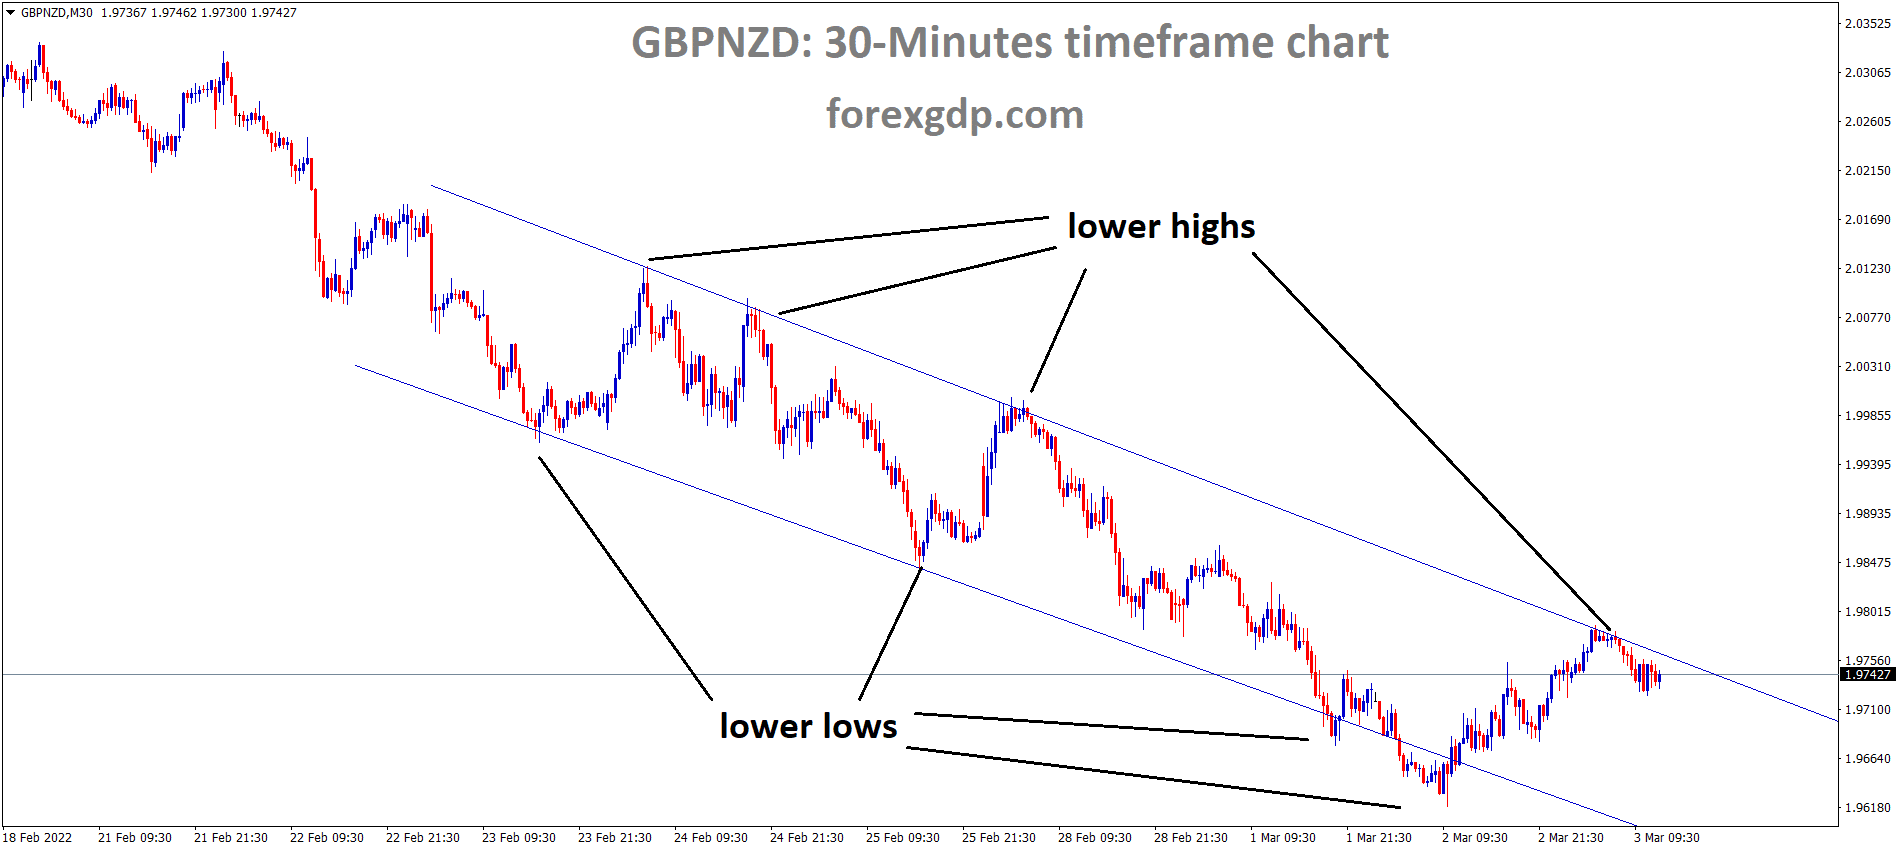 GBPNZD is moving in the Descending channel and the market has reached the lower high area of the channel.